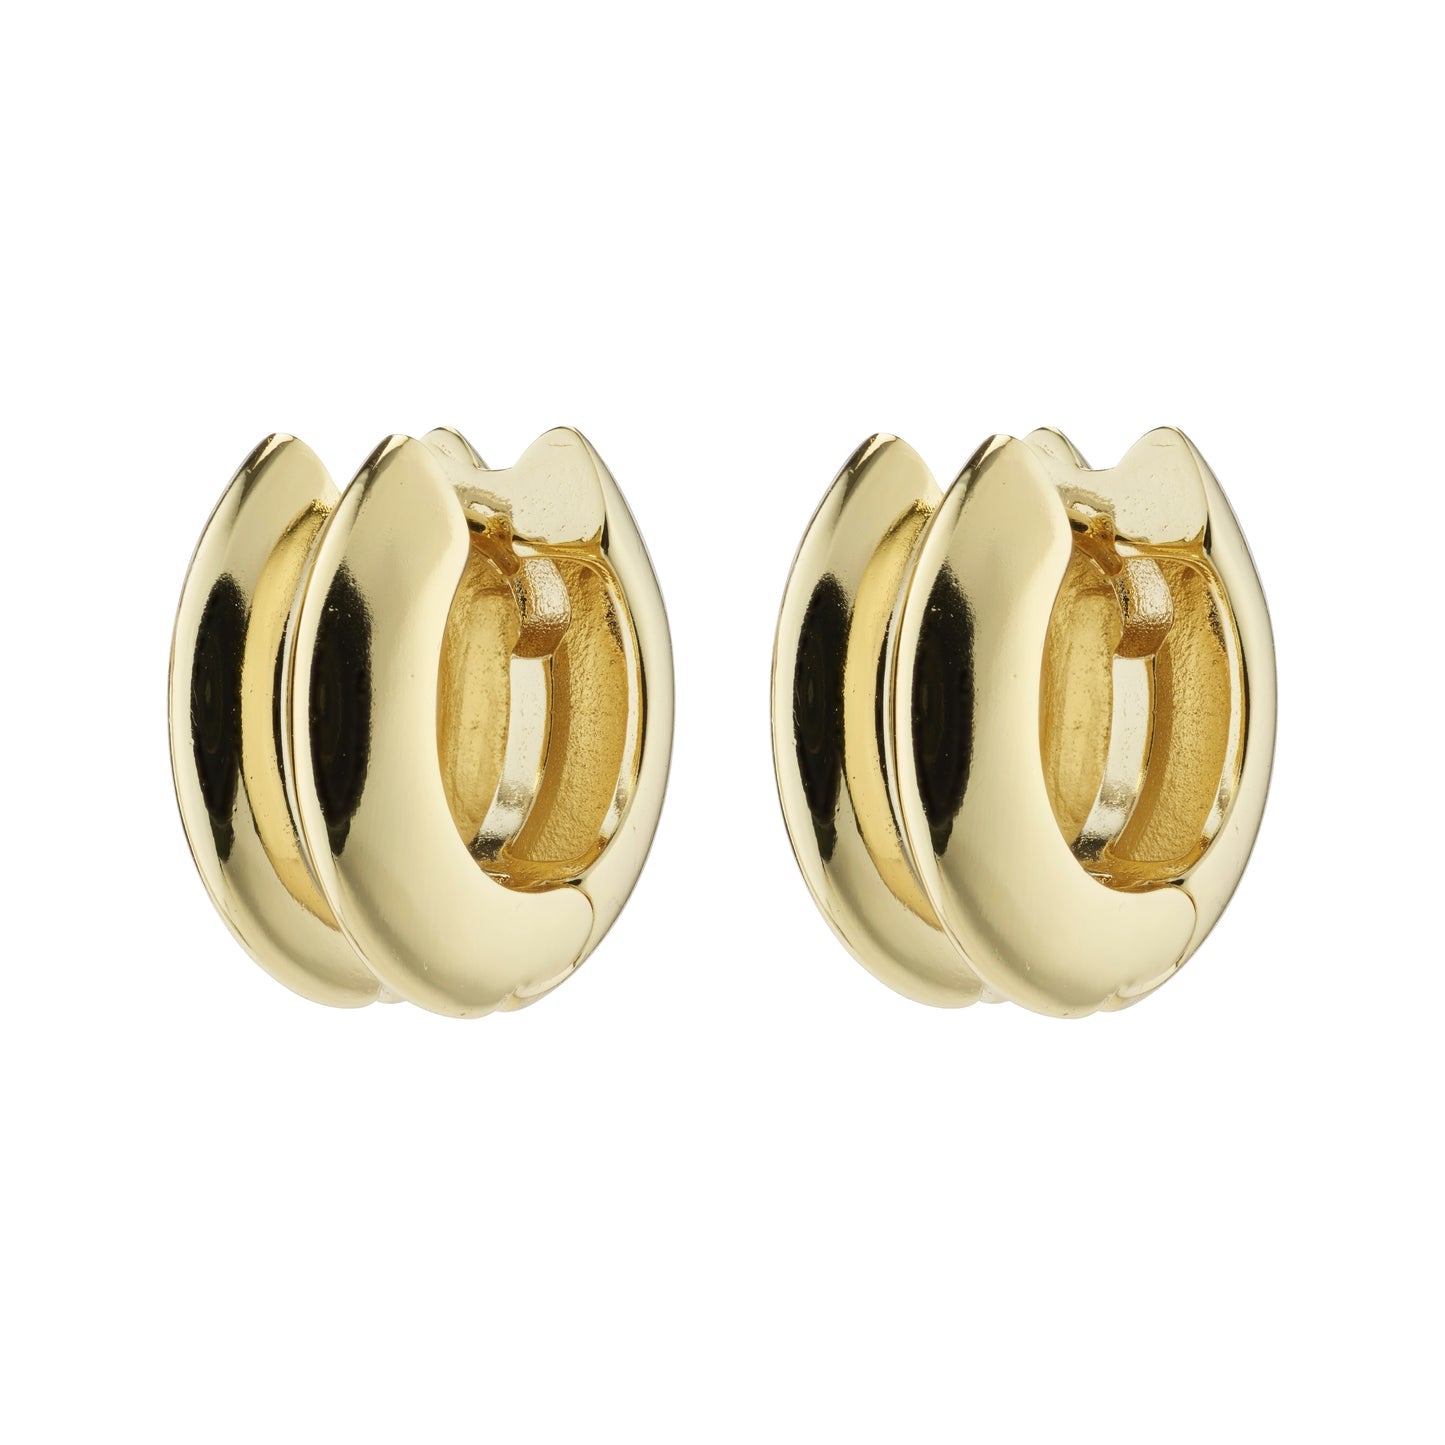 Pilgrim REFLECT Gold Plated Hoops